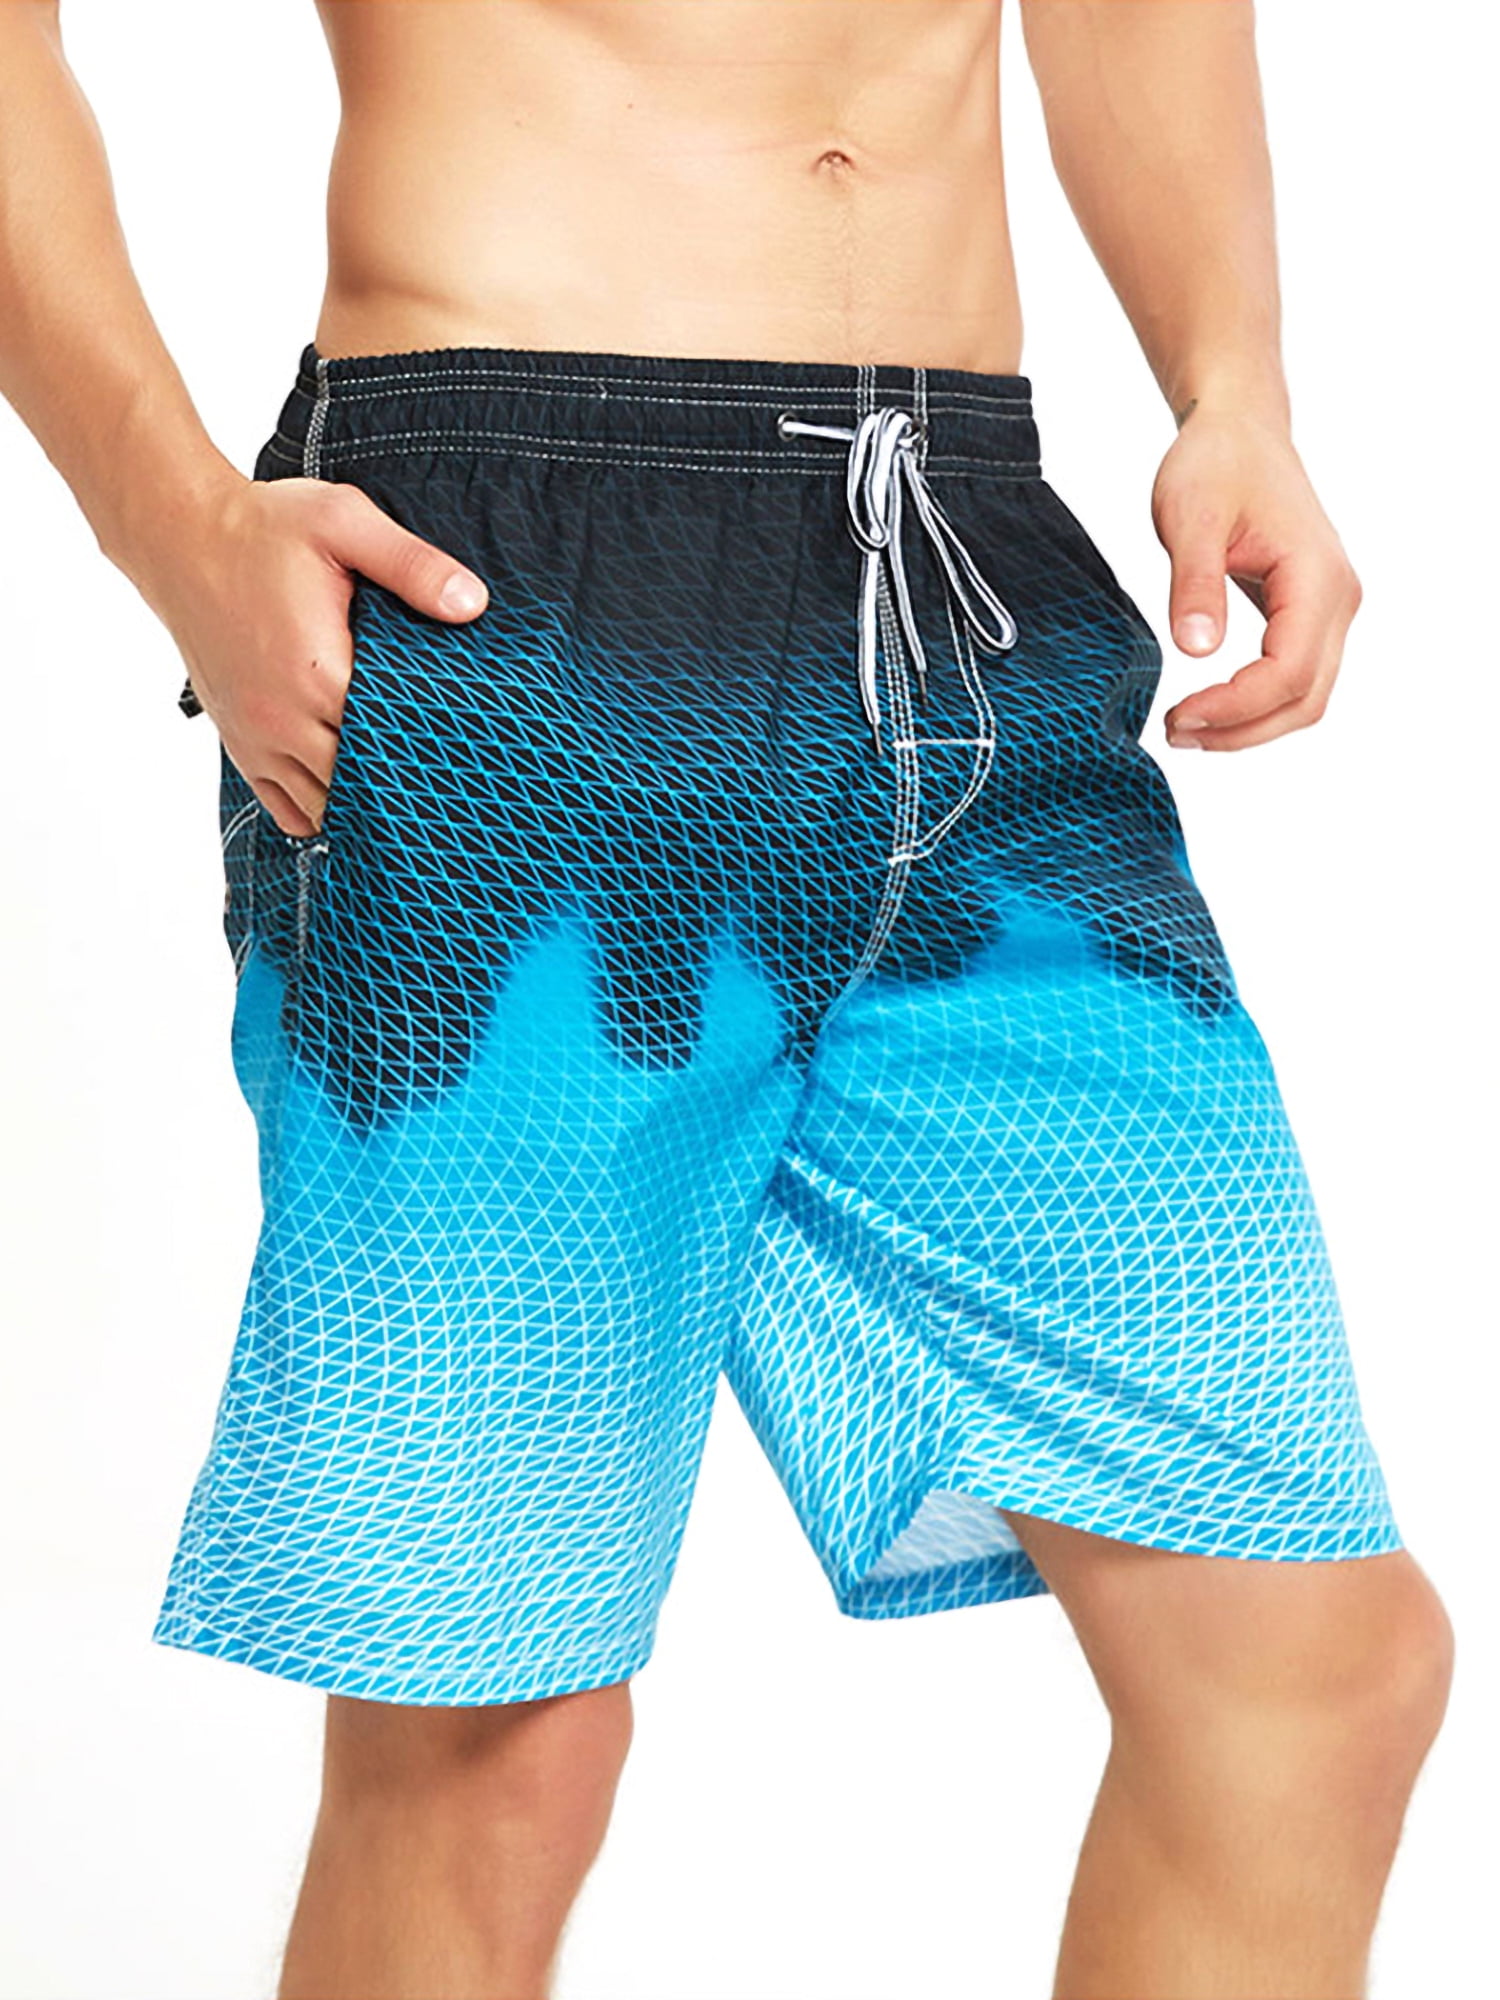 FASUWAVE Mens Swim Trunks Route 66 Quick Dry Beach Board Shorts with Mesh Lining